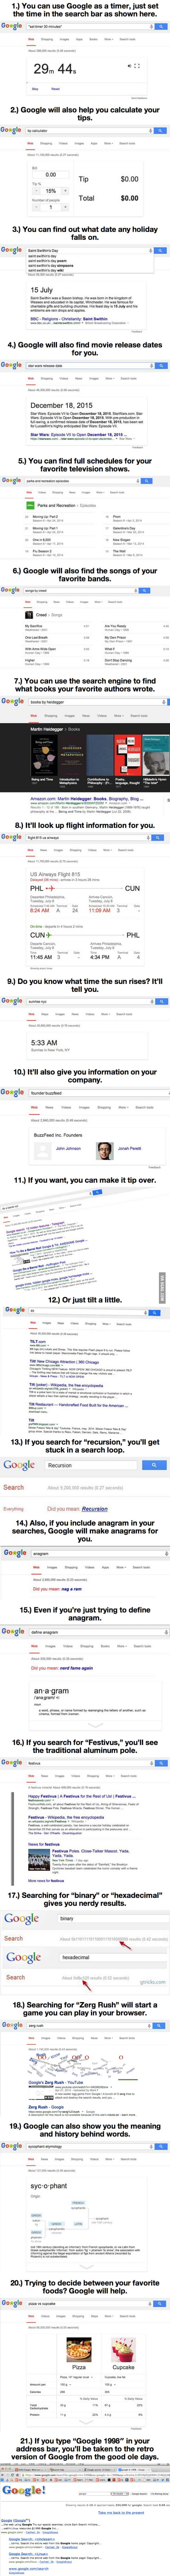 21 google tricks you might not know